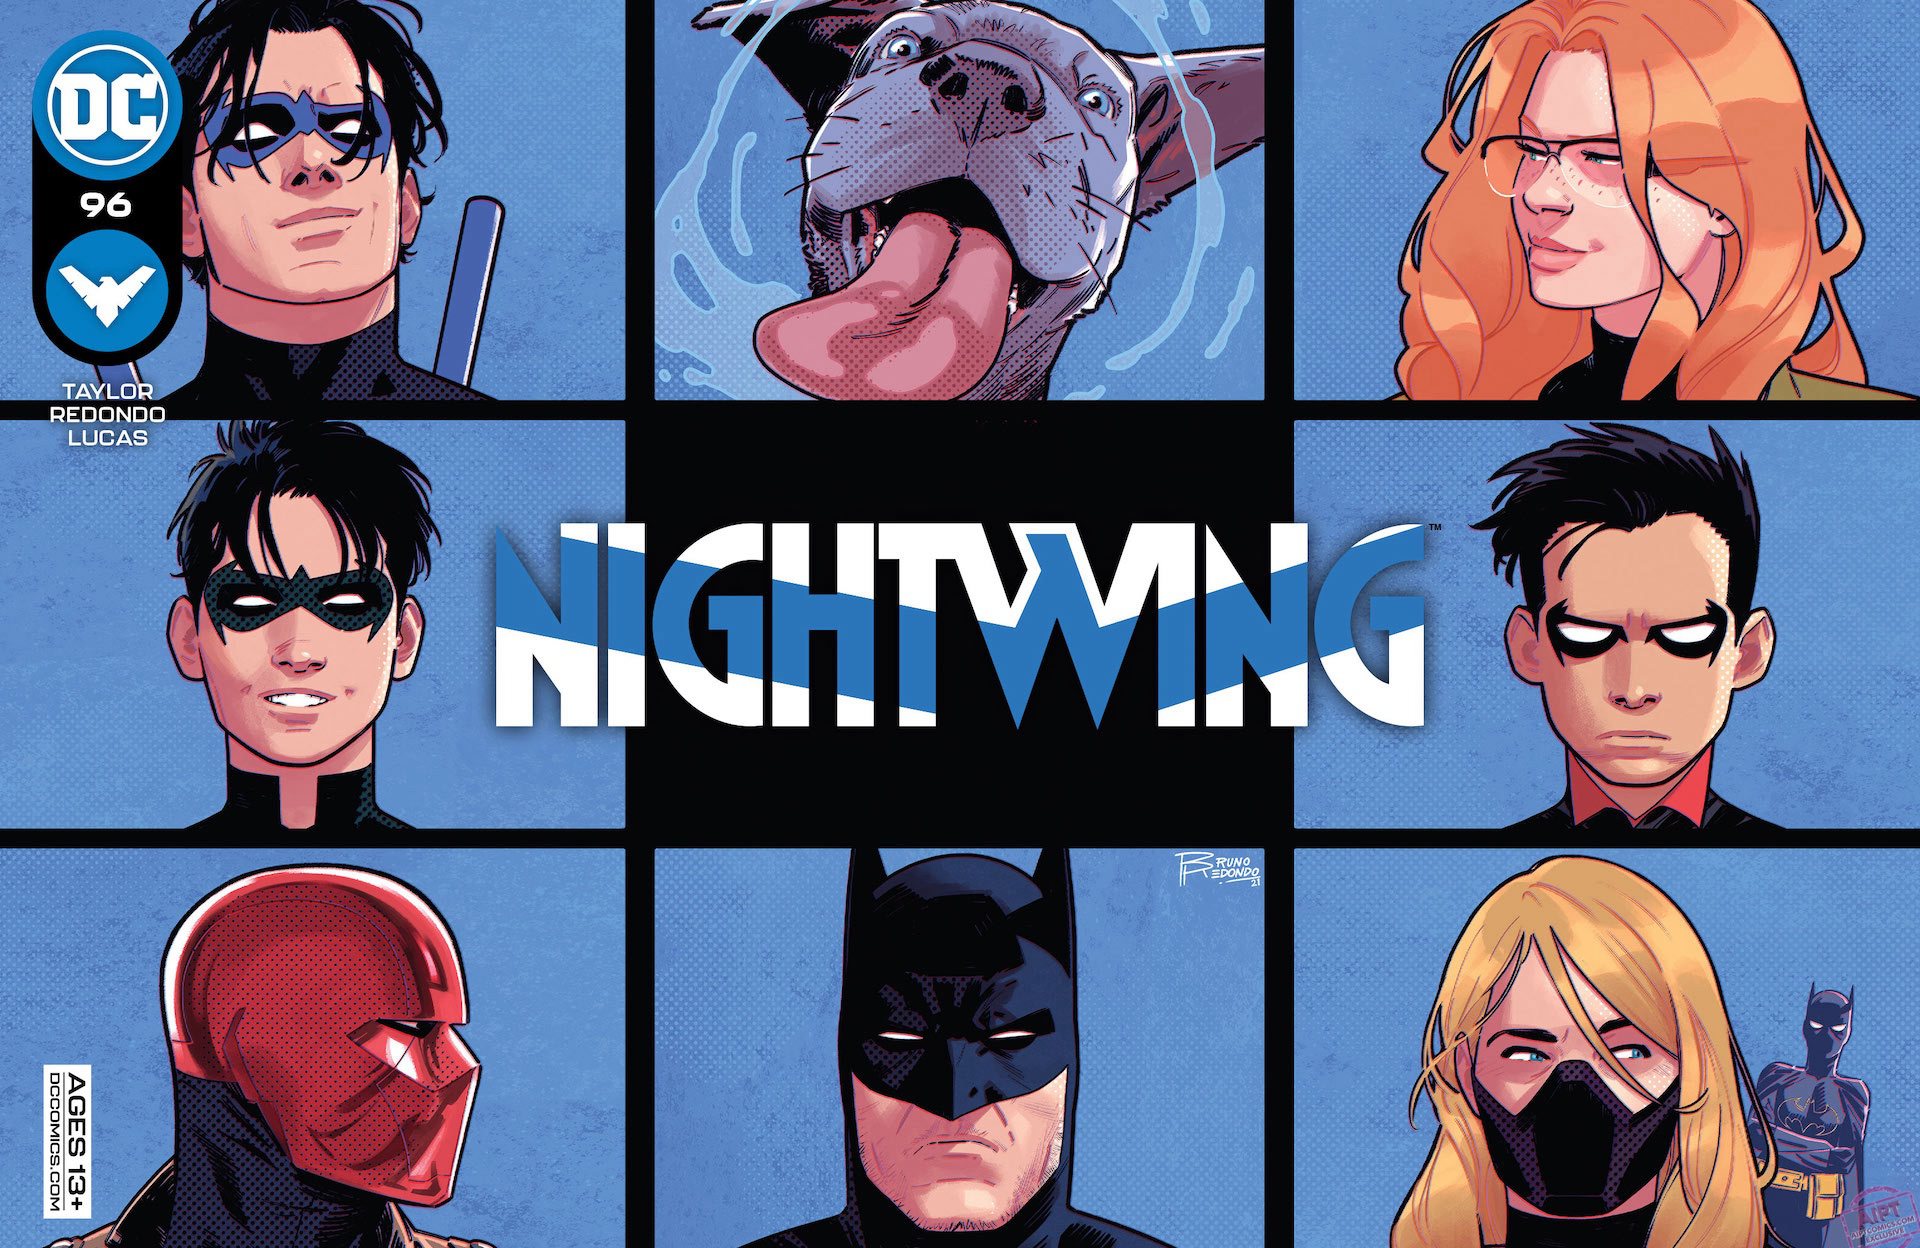 DC Preview: Nightwing #96